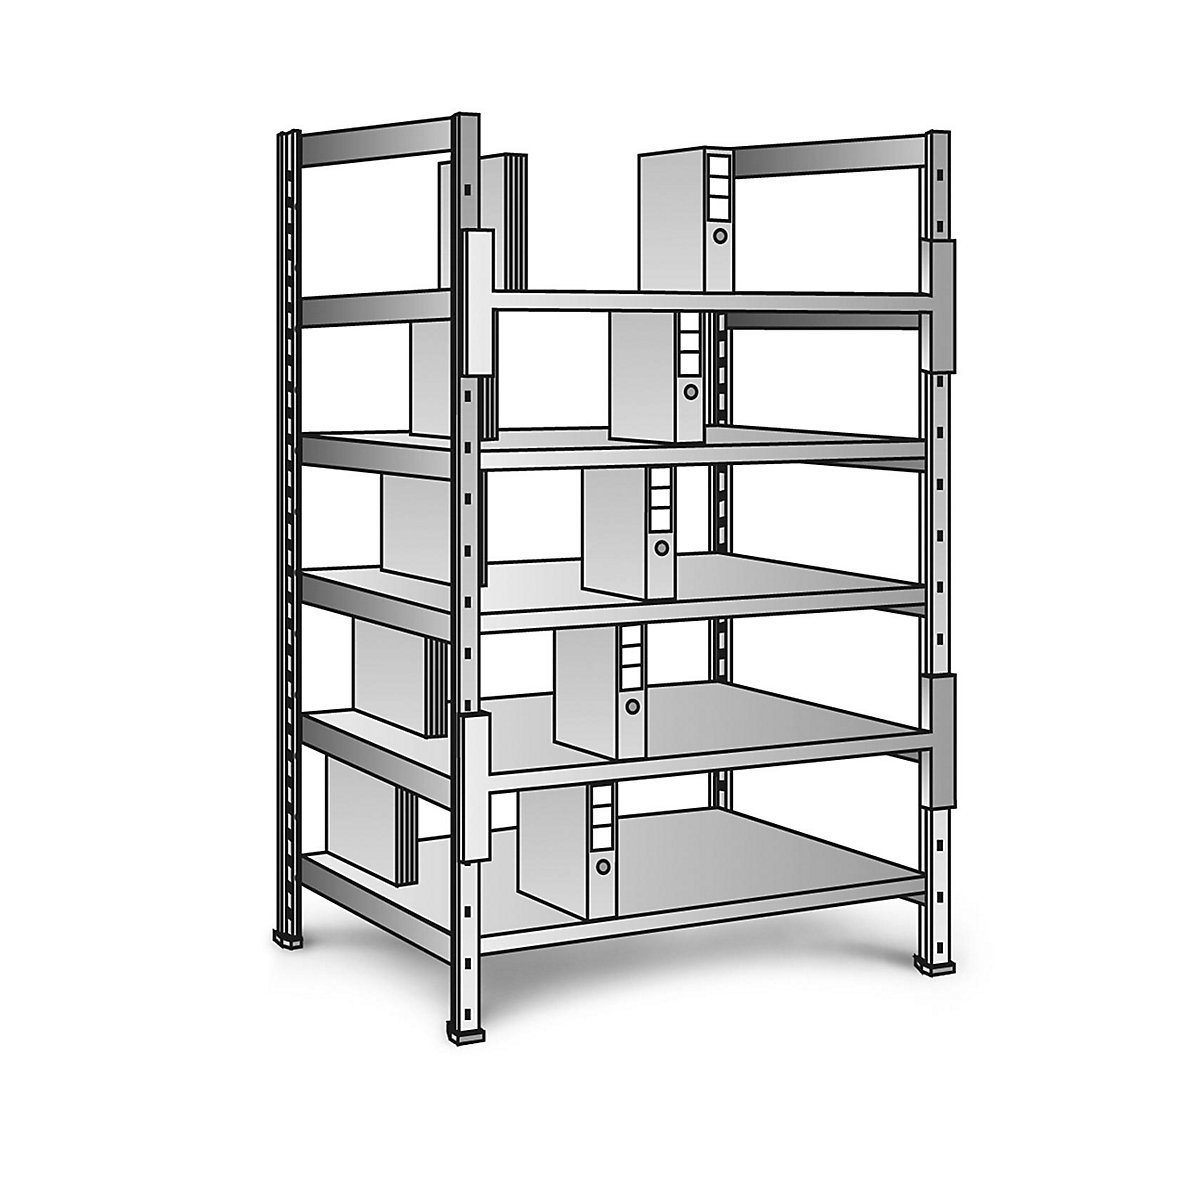 Boltless shelving units for files and archives, zinc plated, height 1920 mm, double sided, shelf WxD 800 x 600 mm, standard shelf unit-7